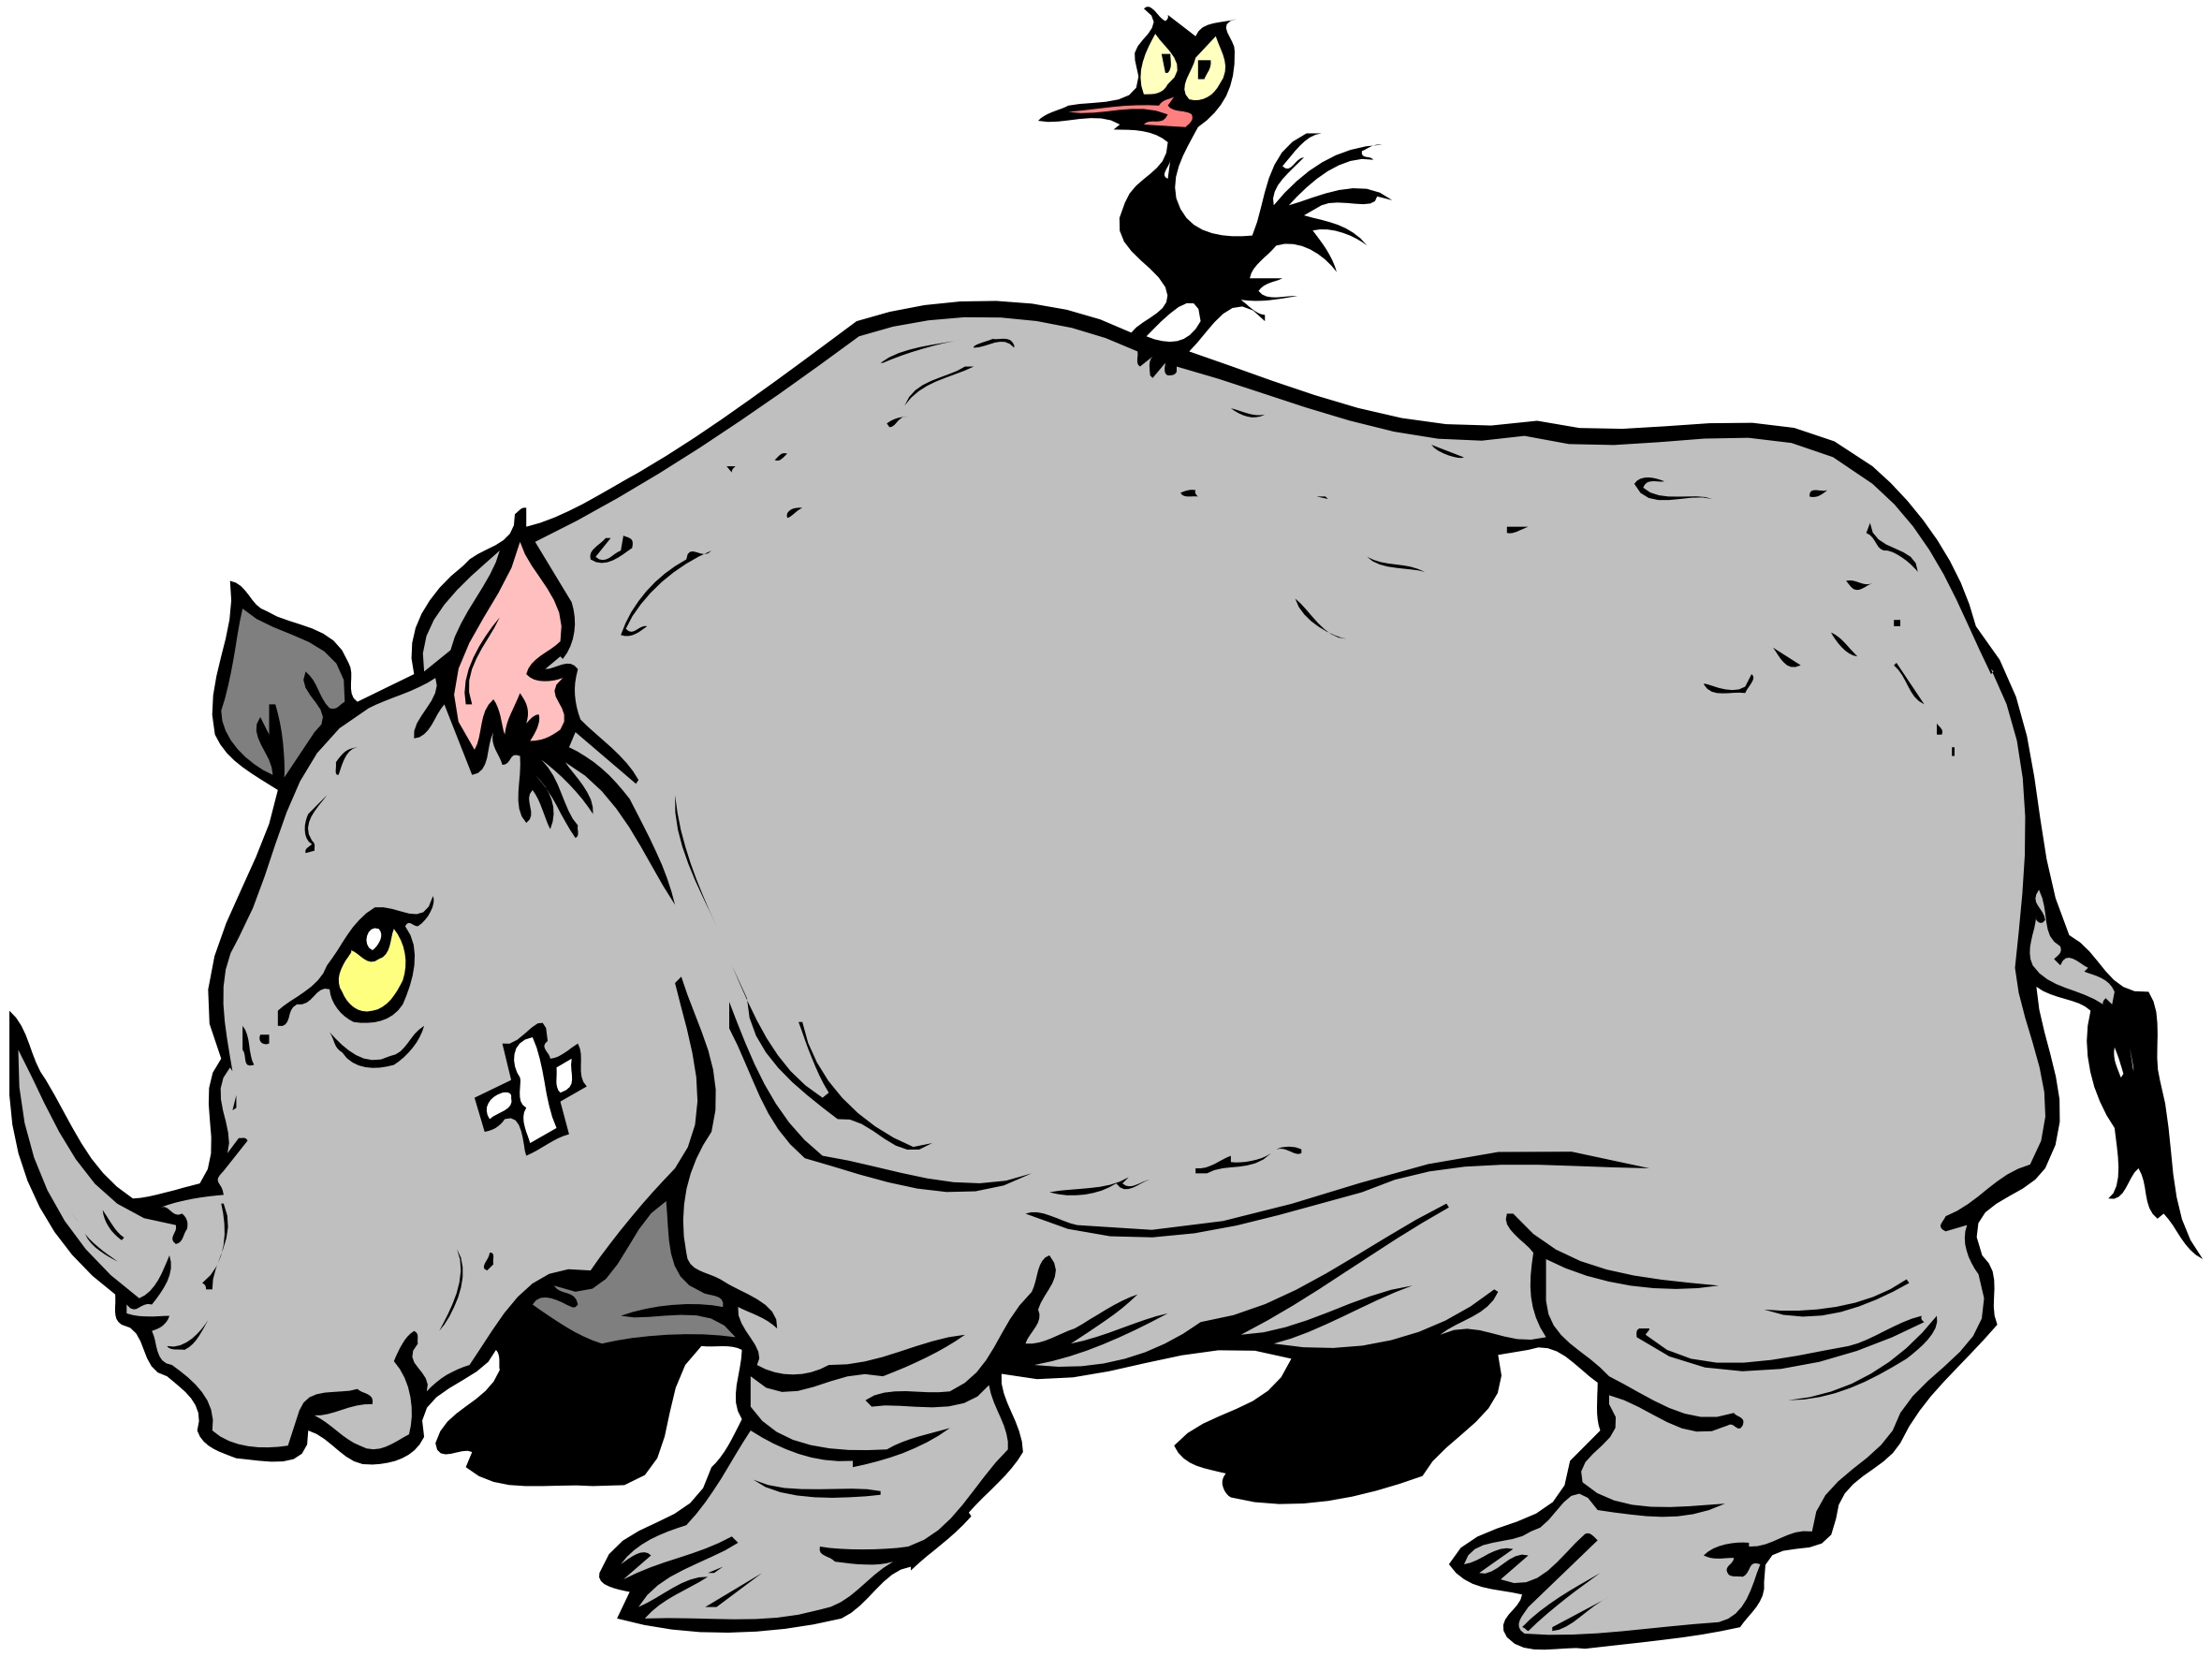 Rhino Cartoon Character Images  Pictures - Becuo